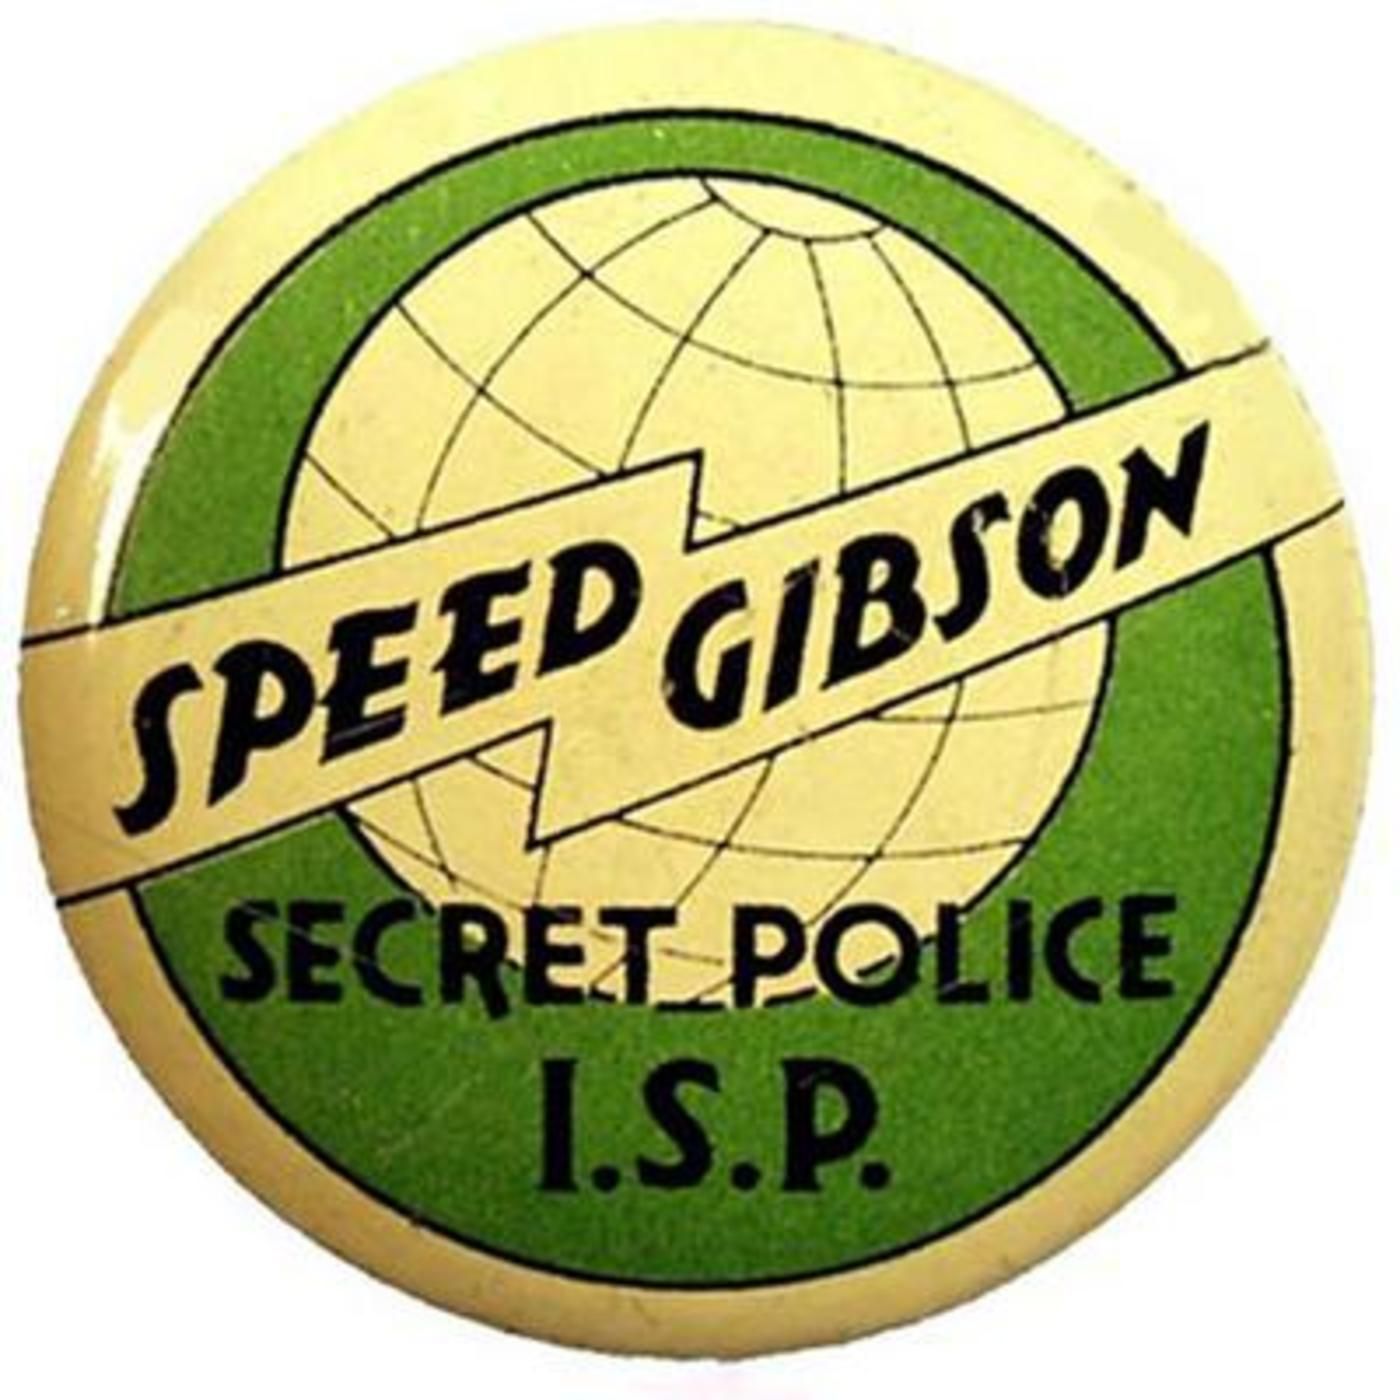 Speed Gibson of the International Secret Police - 1937-08-07 -  - 32 A Trap Has Been Set